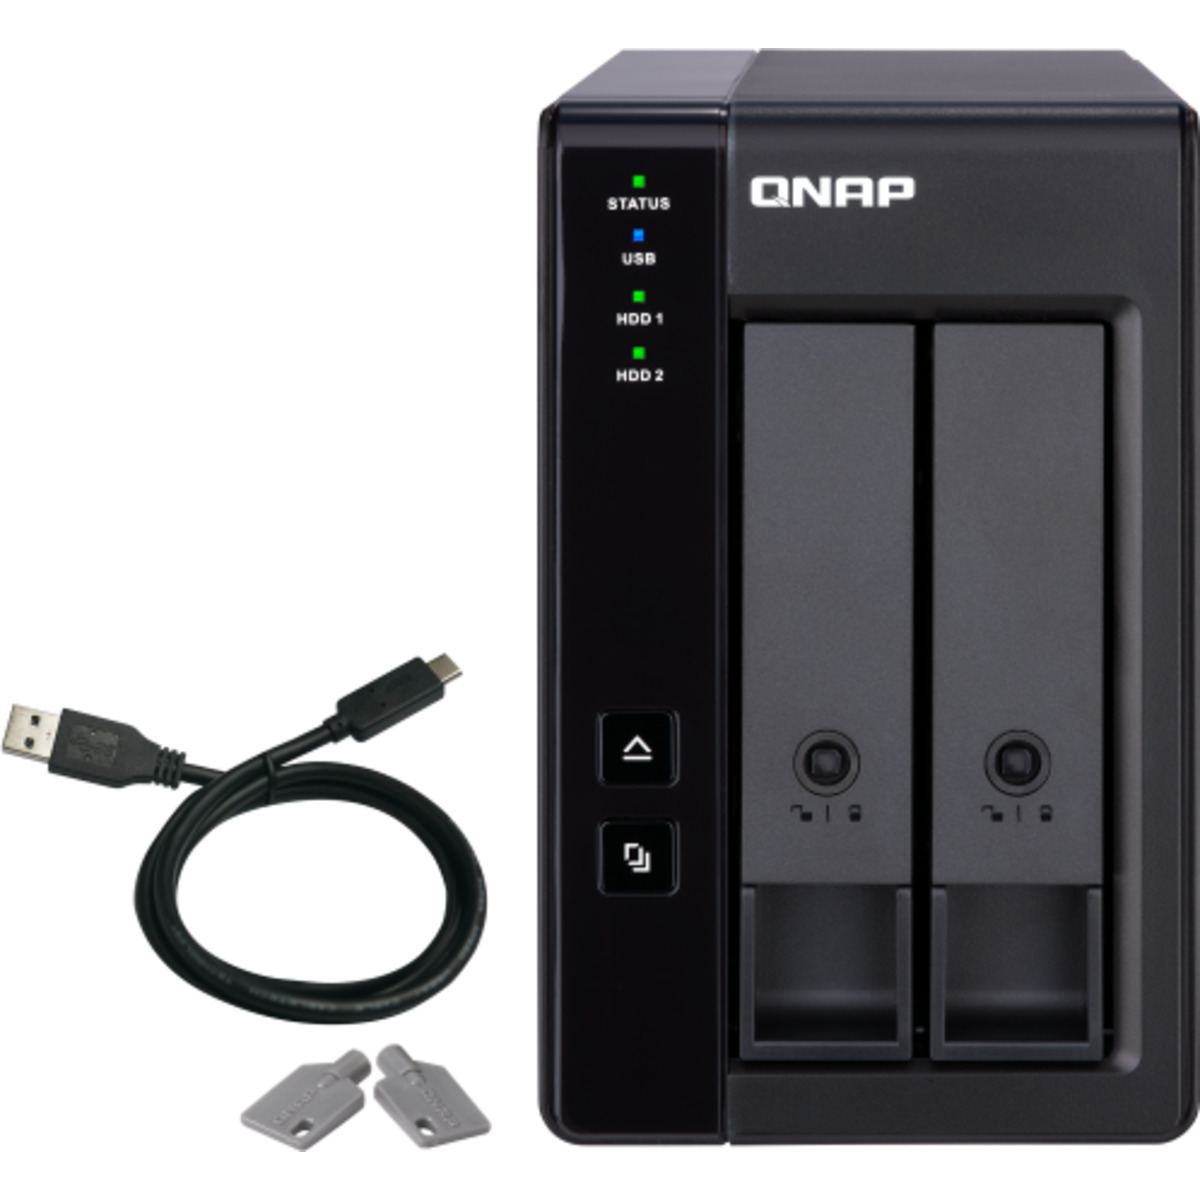 QNAP TR-002 External Expansion Drive 2tb 2-Bay Desktop Multimedia / Power User / Business Expansion Enclosure 2x1tb Western Digital Red SA500 WDS100T1R0A 2.5 560/530MB/s SATA 6Gb/s SSD NAS Class Drives Installed - Burn-In Tested TR-002 External Expansion Drive